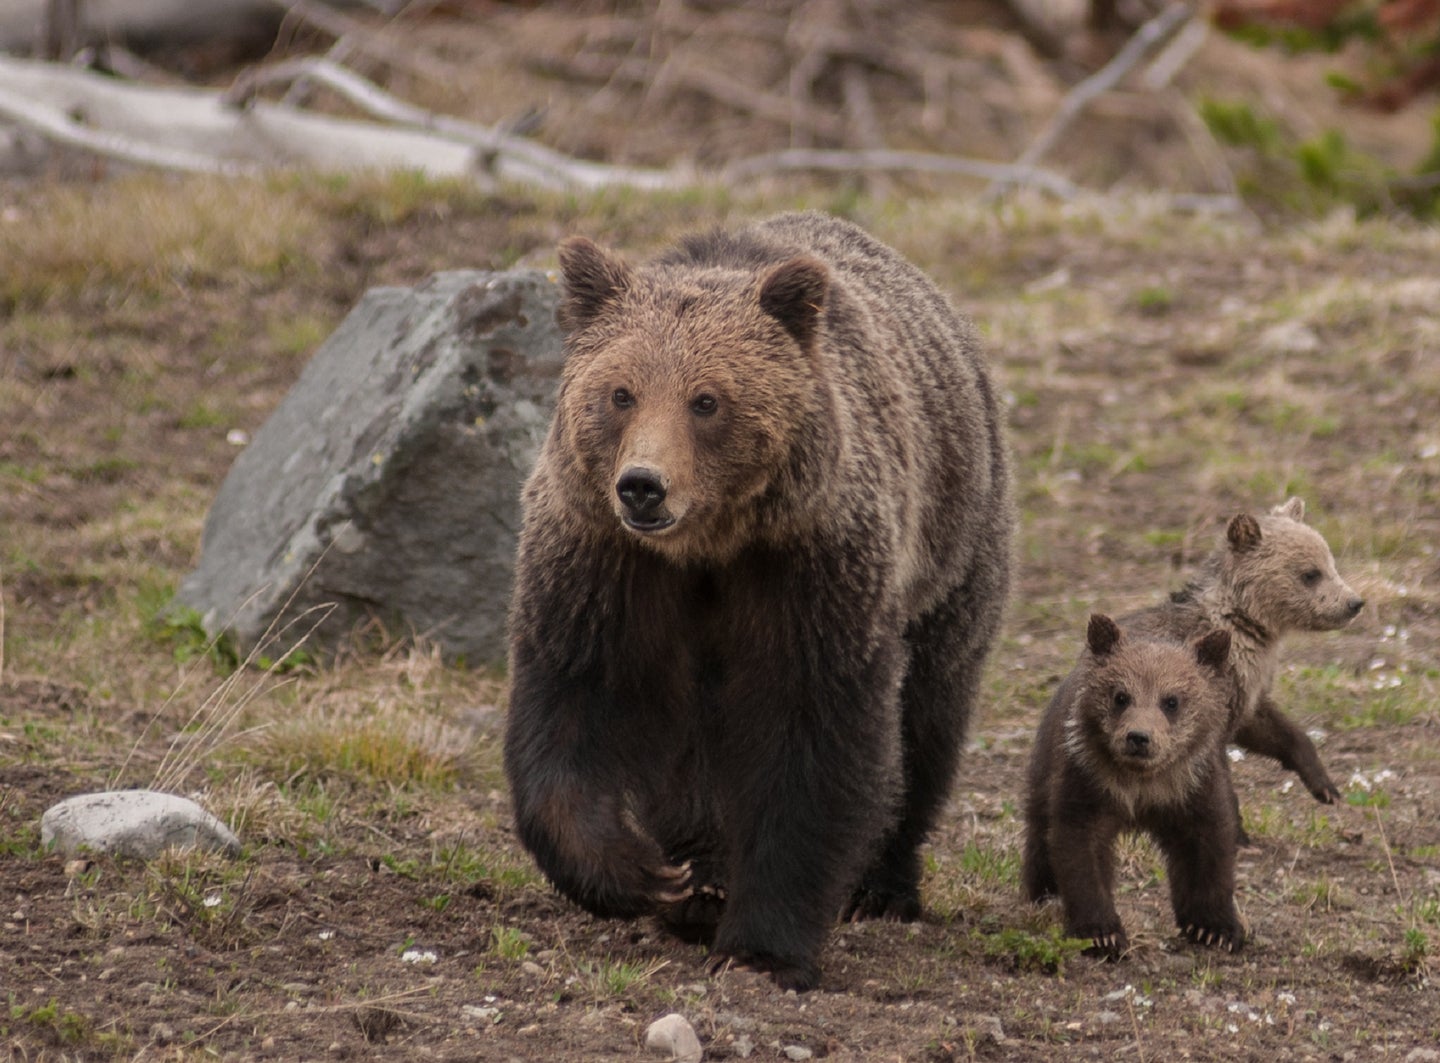 Grizzly bear family in Yellowstone National Park